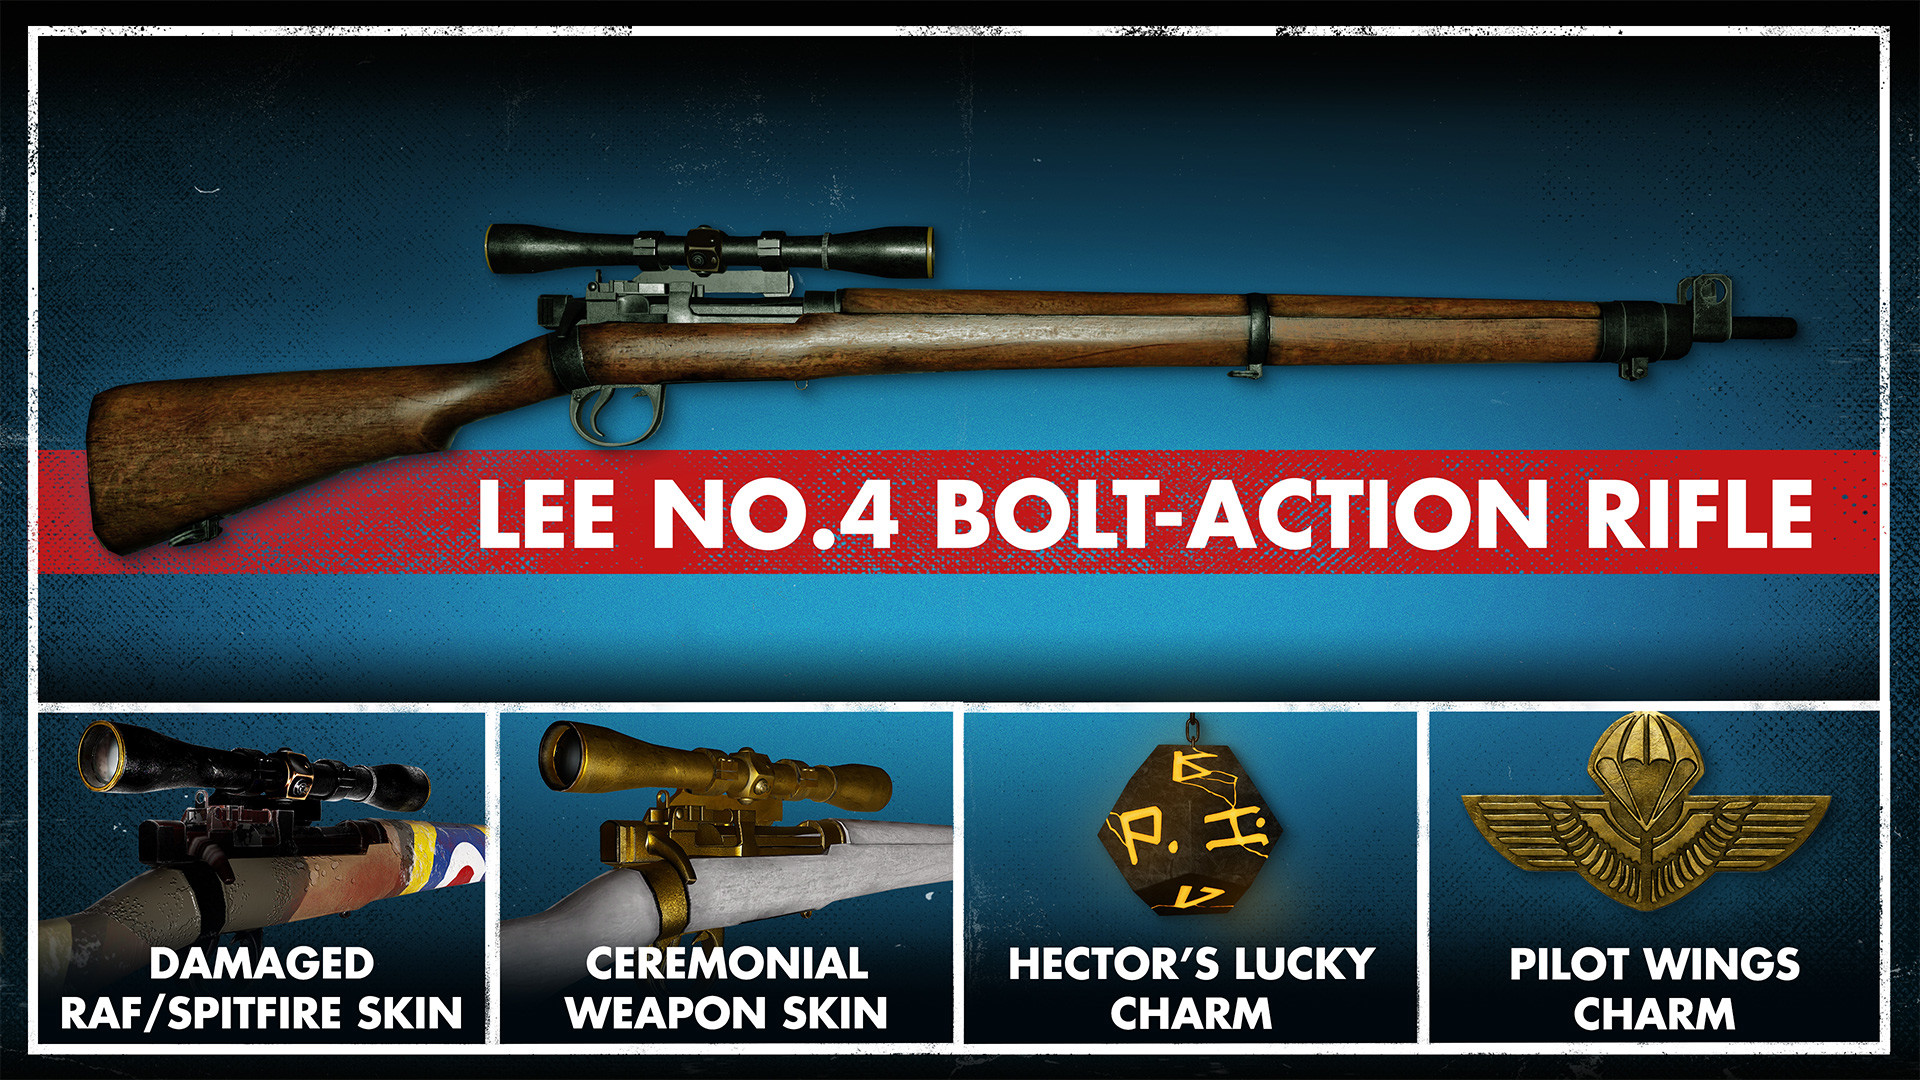 Zombie Army 4: Lee No. 4 Bolt-Action Rifle Bundle Featured Screenshot #1